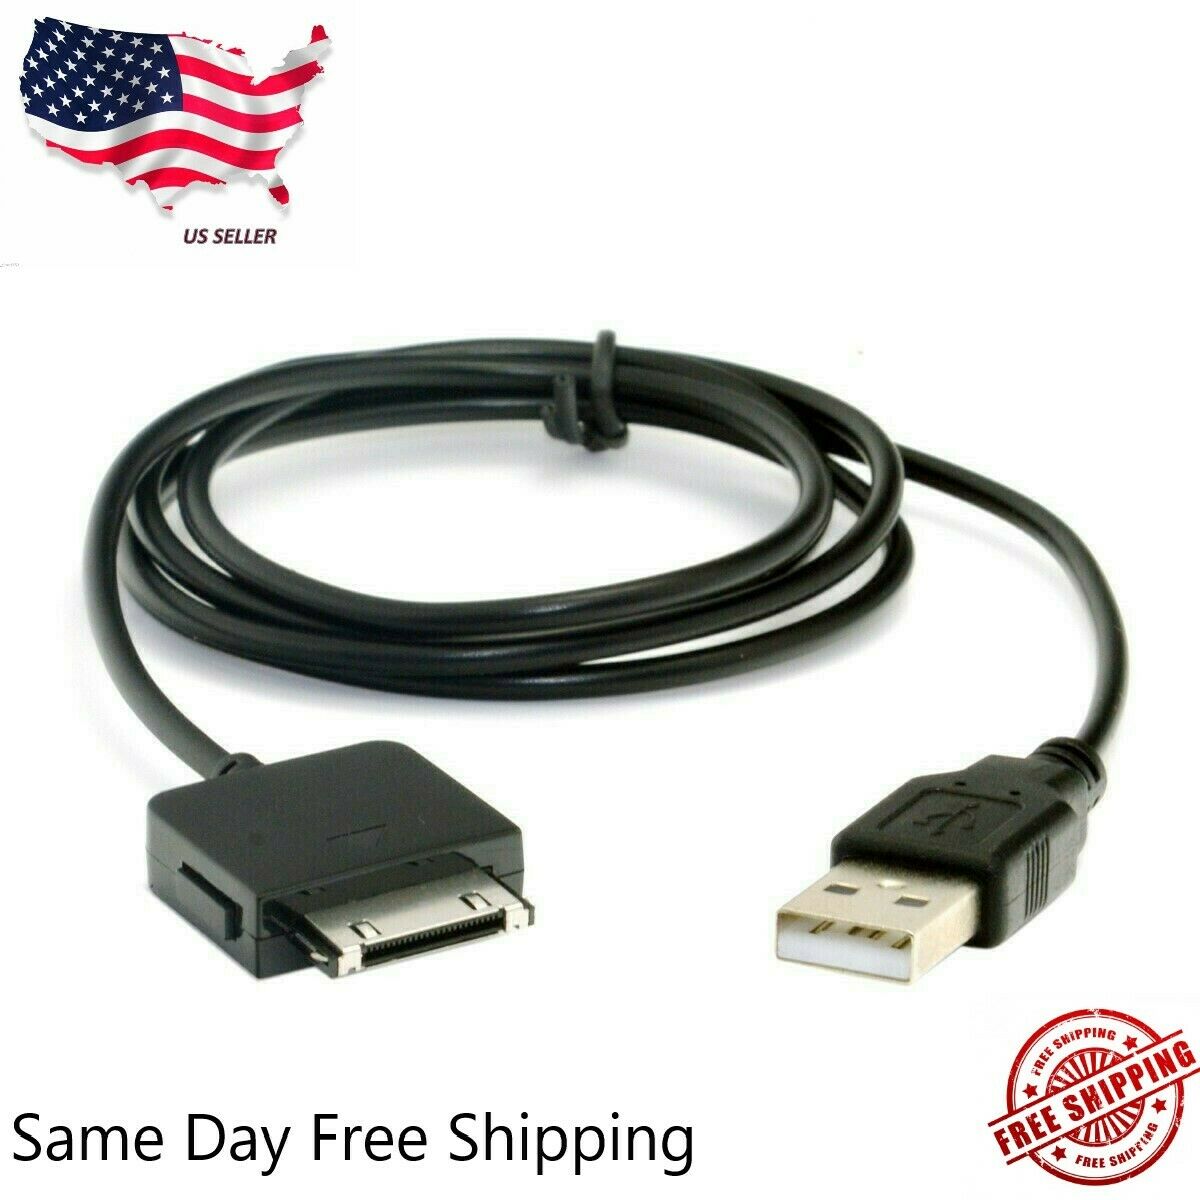 For Microsoft Zune 8 16 30 32 64 80 120 GB USB Data Sync Charge Cable Adapter Model: Microsoft Zune 8 16 30 32 64 80 C